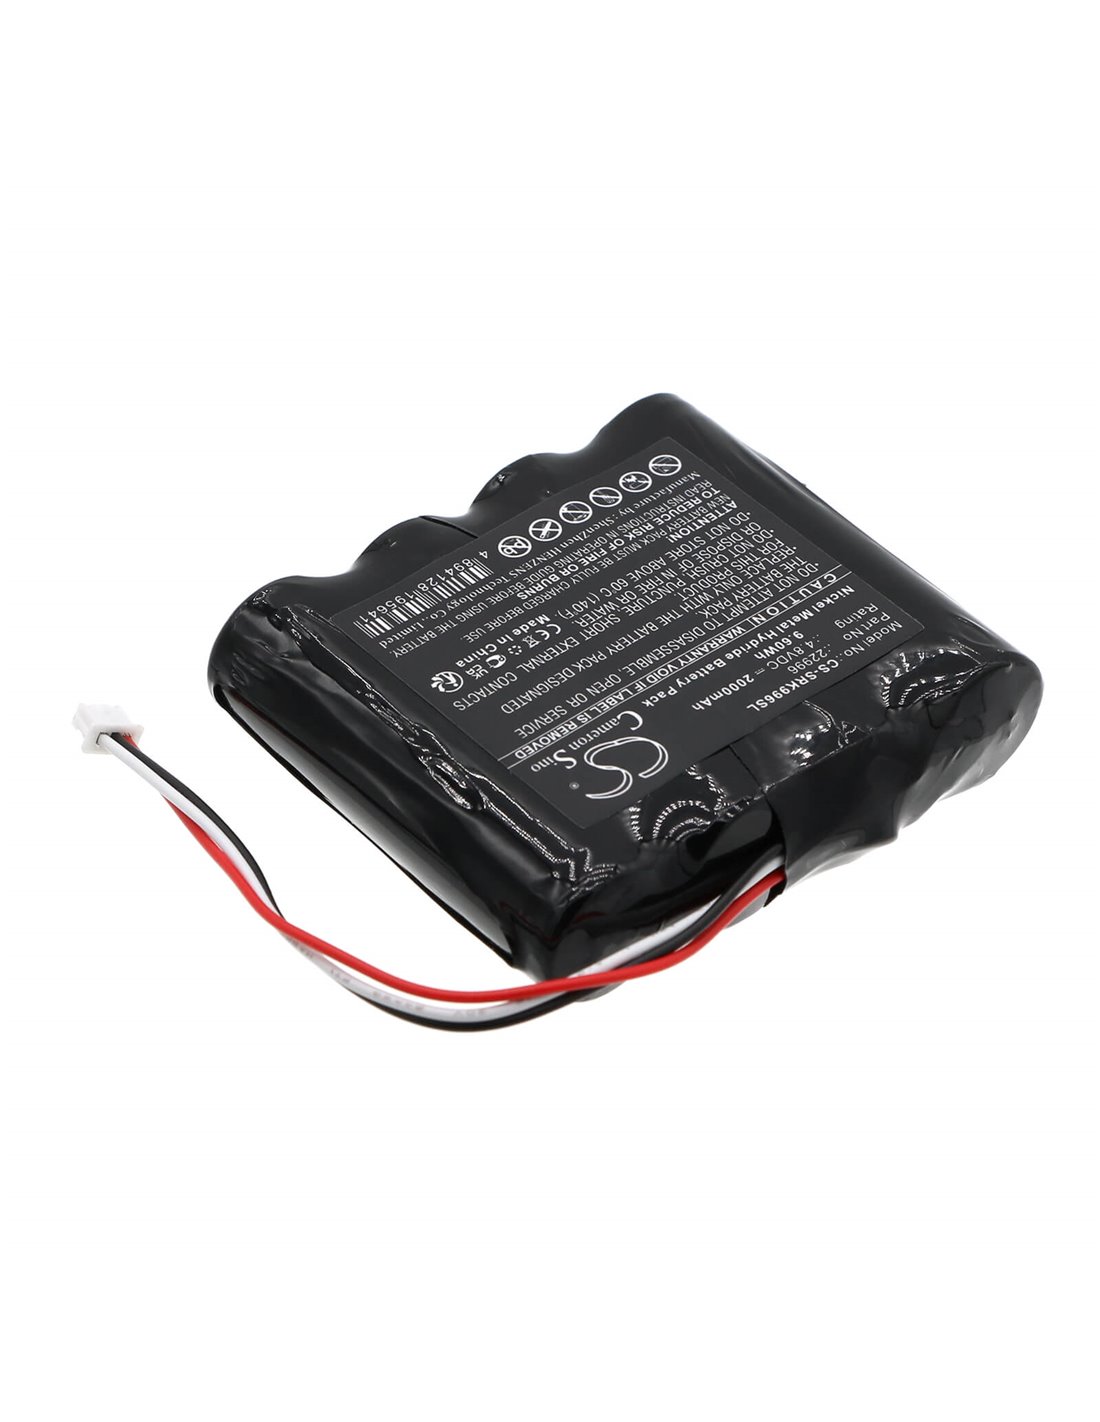 4.8V, Ni-MH, 2000mAh, Battery fits Systronik, 4-hxaal, 9.60Wh